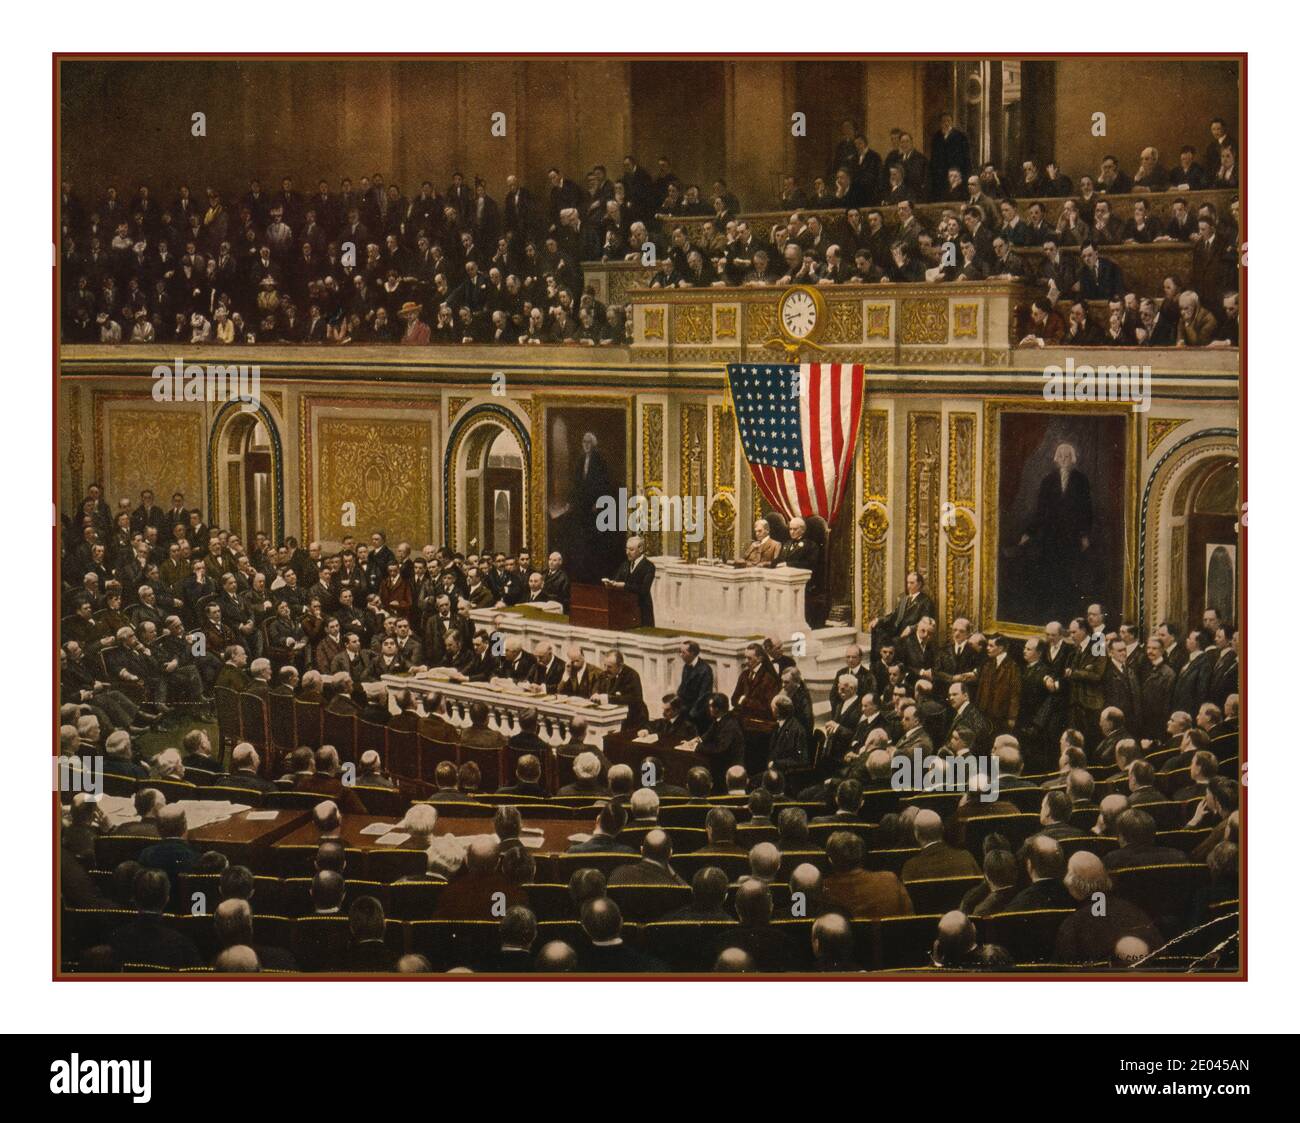 Archive USA WW1 American Congress  “For the freedom of the world” President Woodrow Wilson asking Congress to declare war on Germany, April 2, 1917. [1917], c1918 December 21.  Wilson, Woodrow,--1856-1924 -  World War, 1914-1918--Communications--Washington D.C. USA Stock Photo